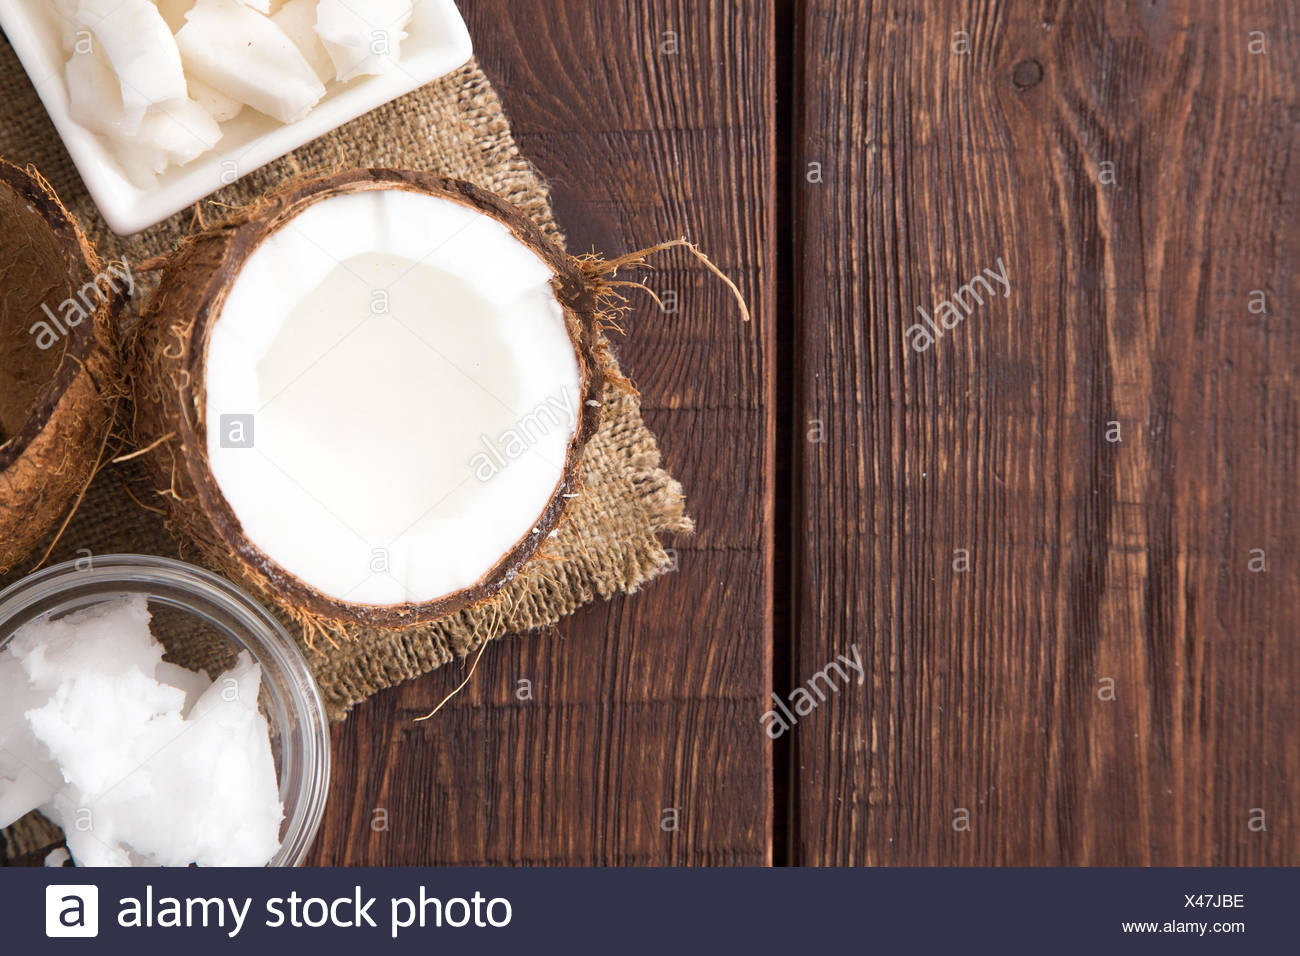 Coconut With Coconut Oil In Jar On Wooden Background Stock Photo